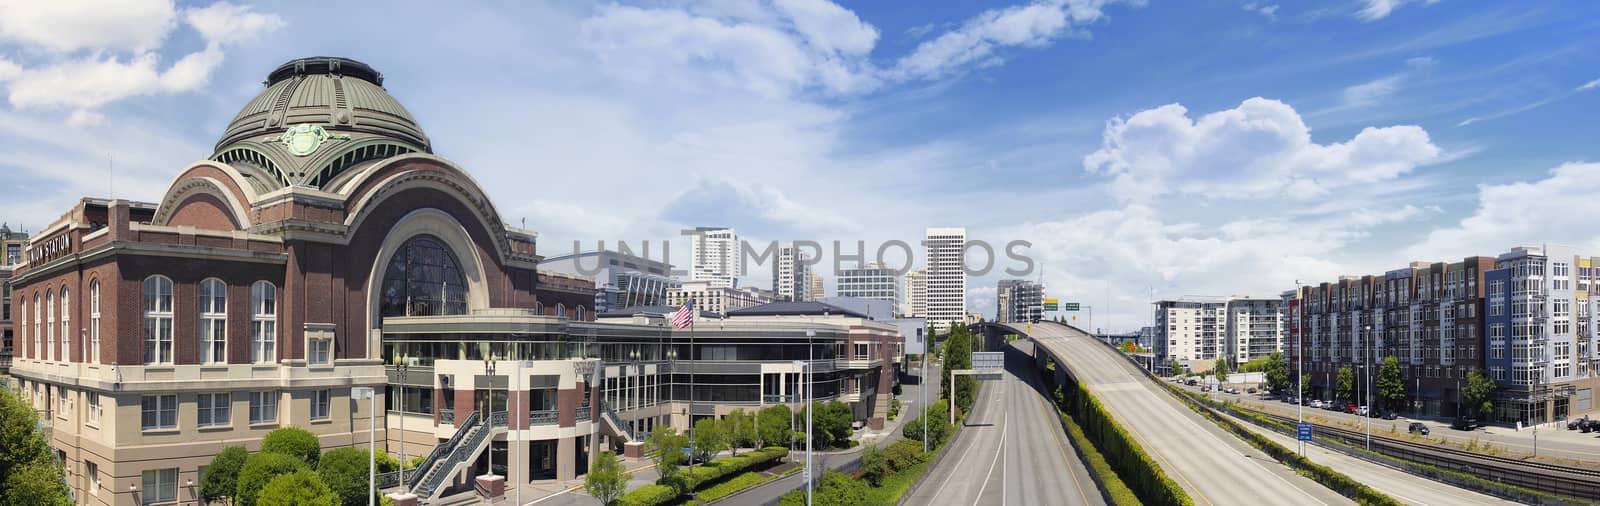 Freeways to City of Tacoma Washington with Union Station Federal Courthouse with Blue Sky and Clouds Panorama